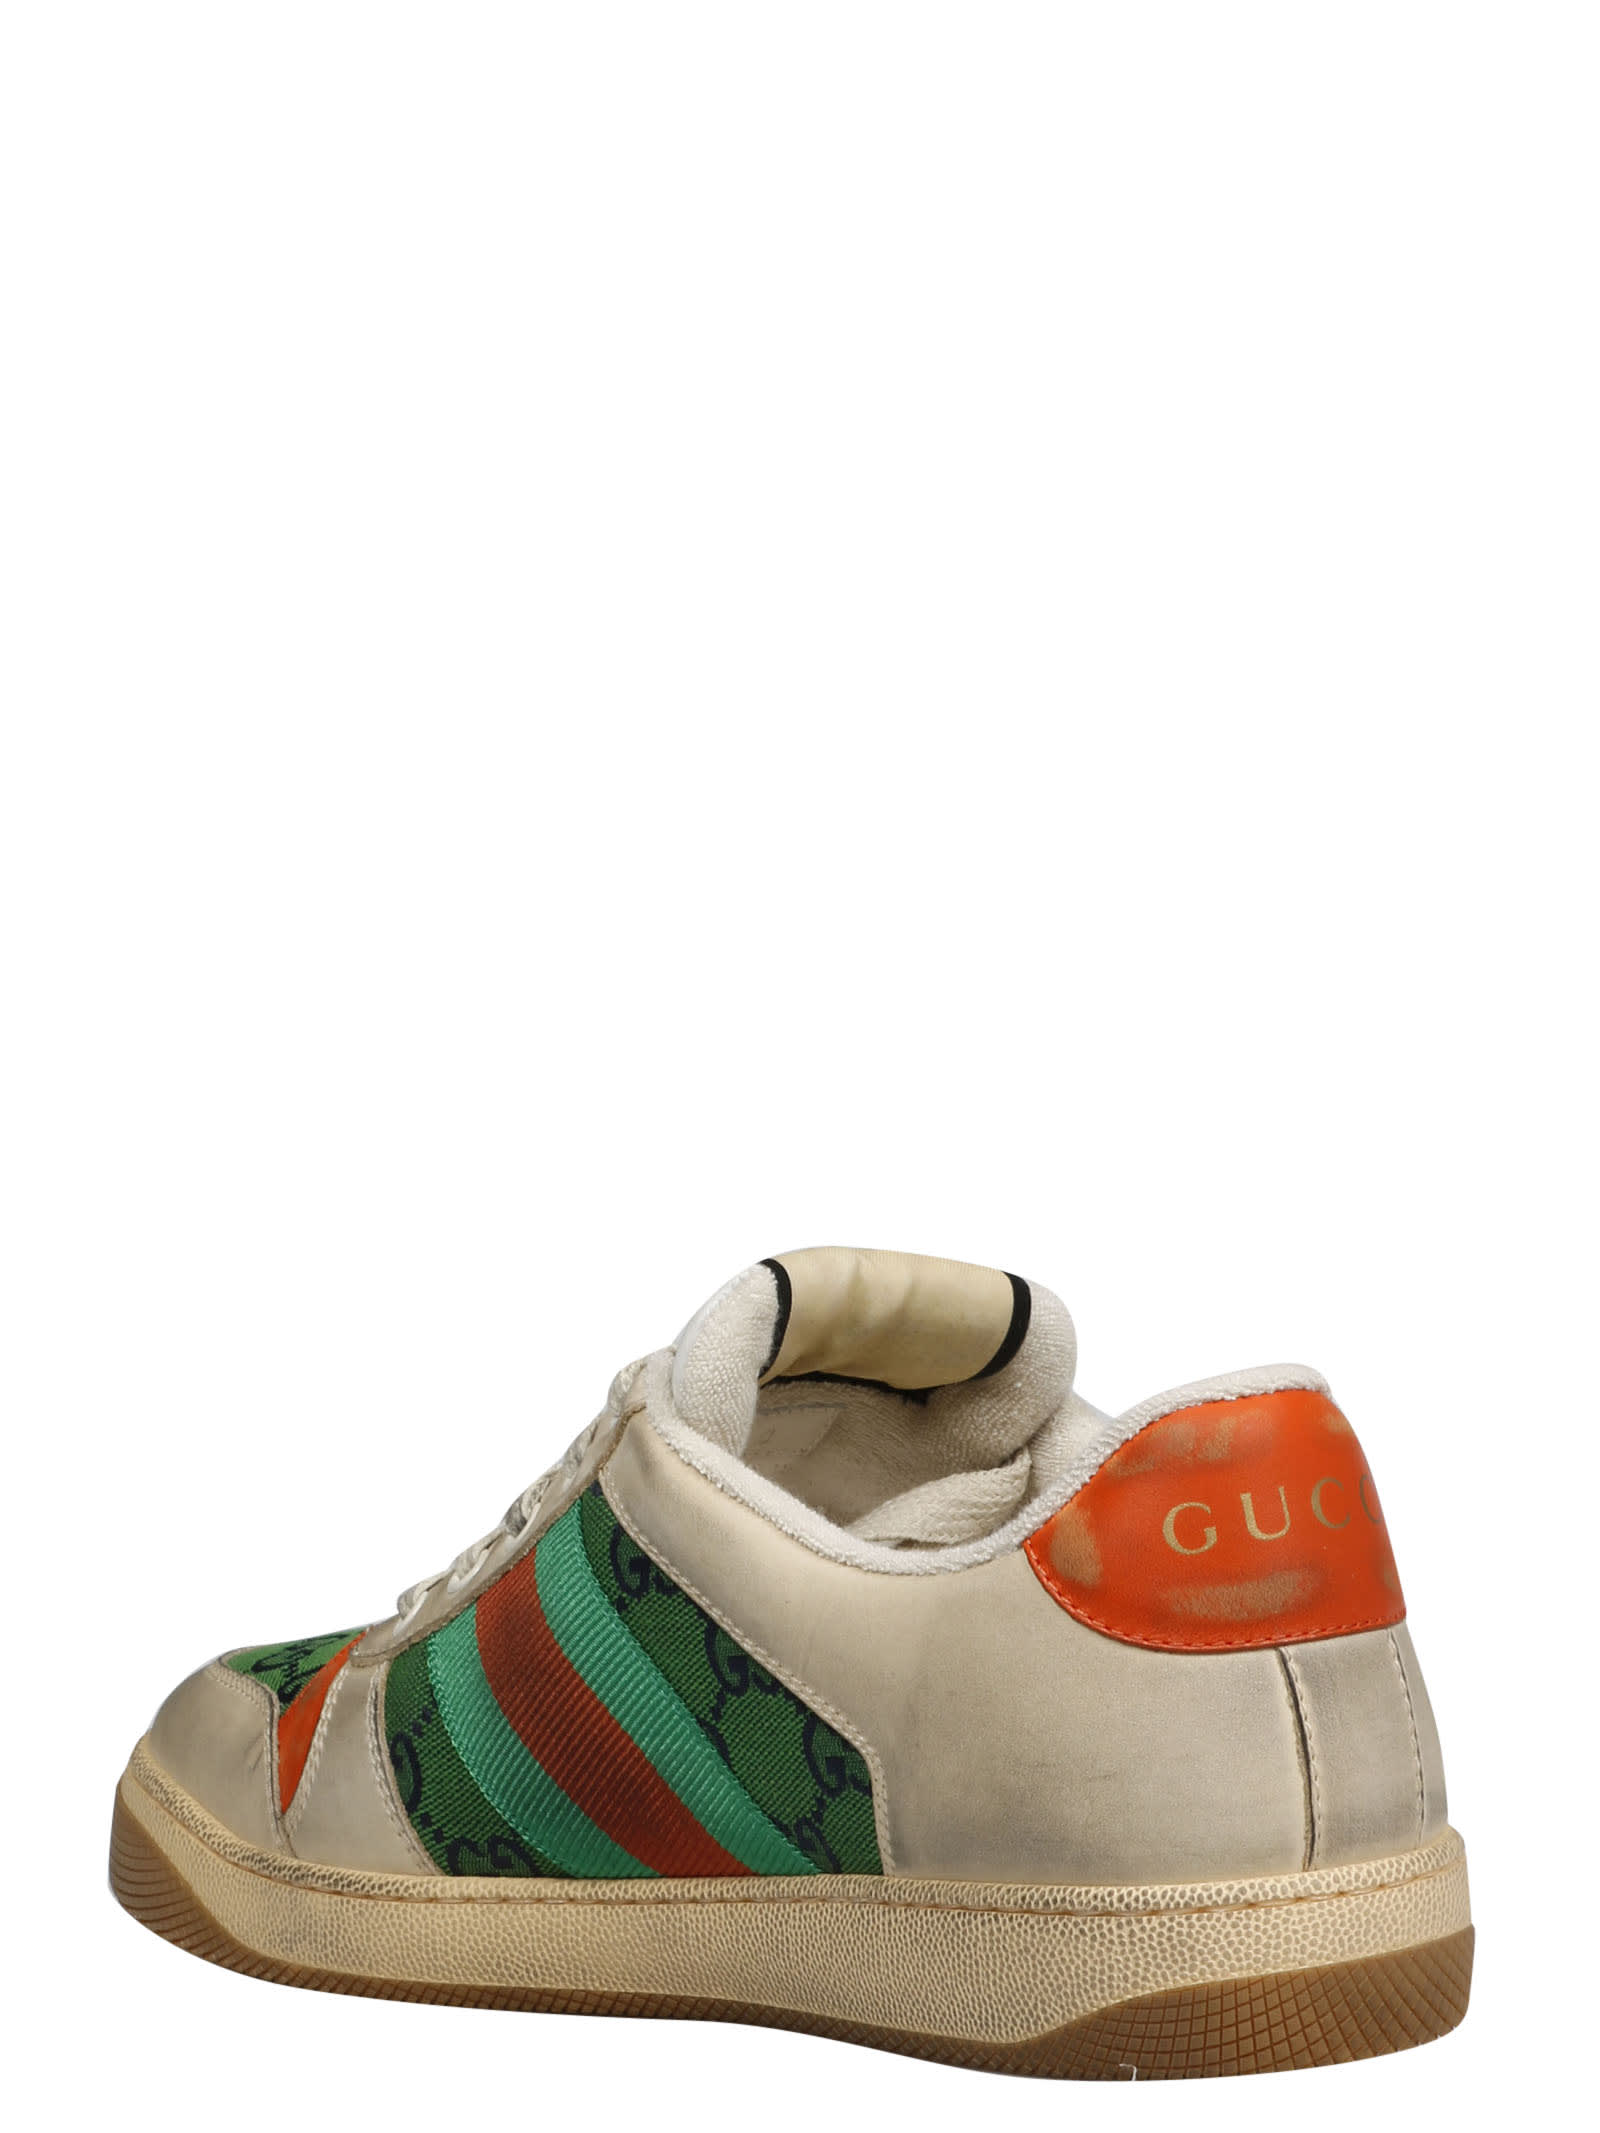 century 21 gucci sneakers